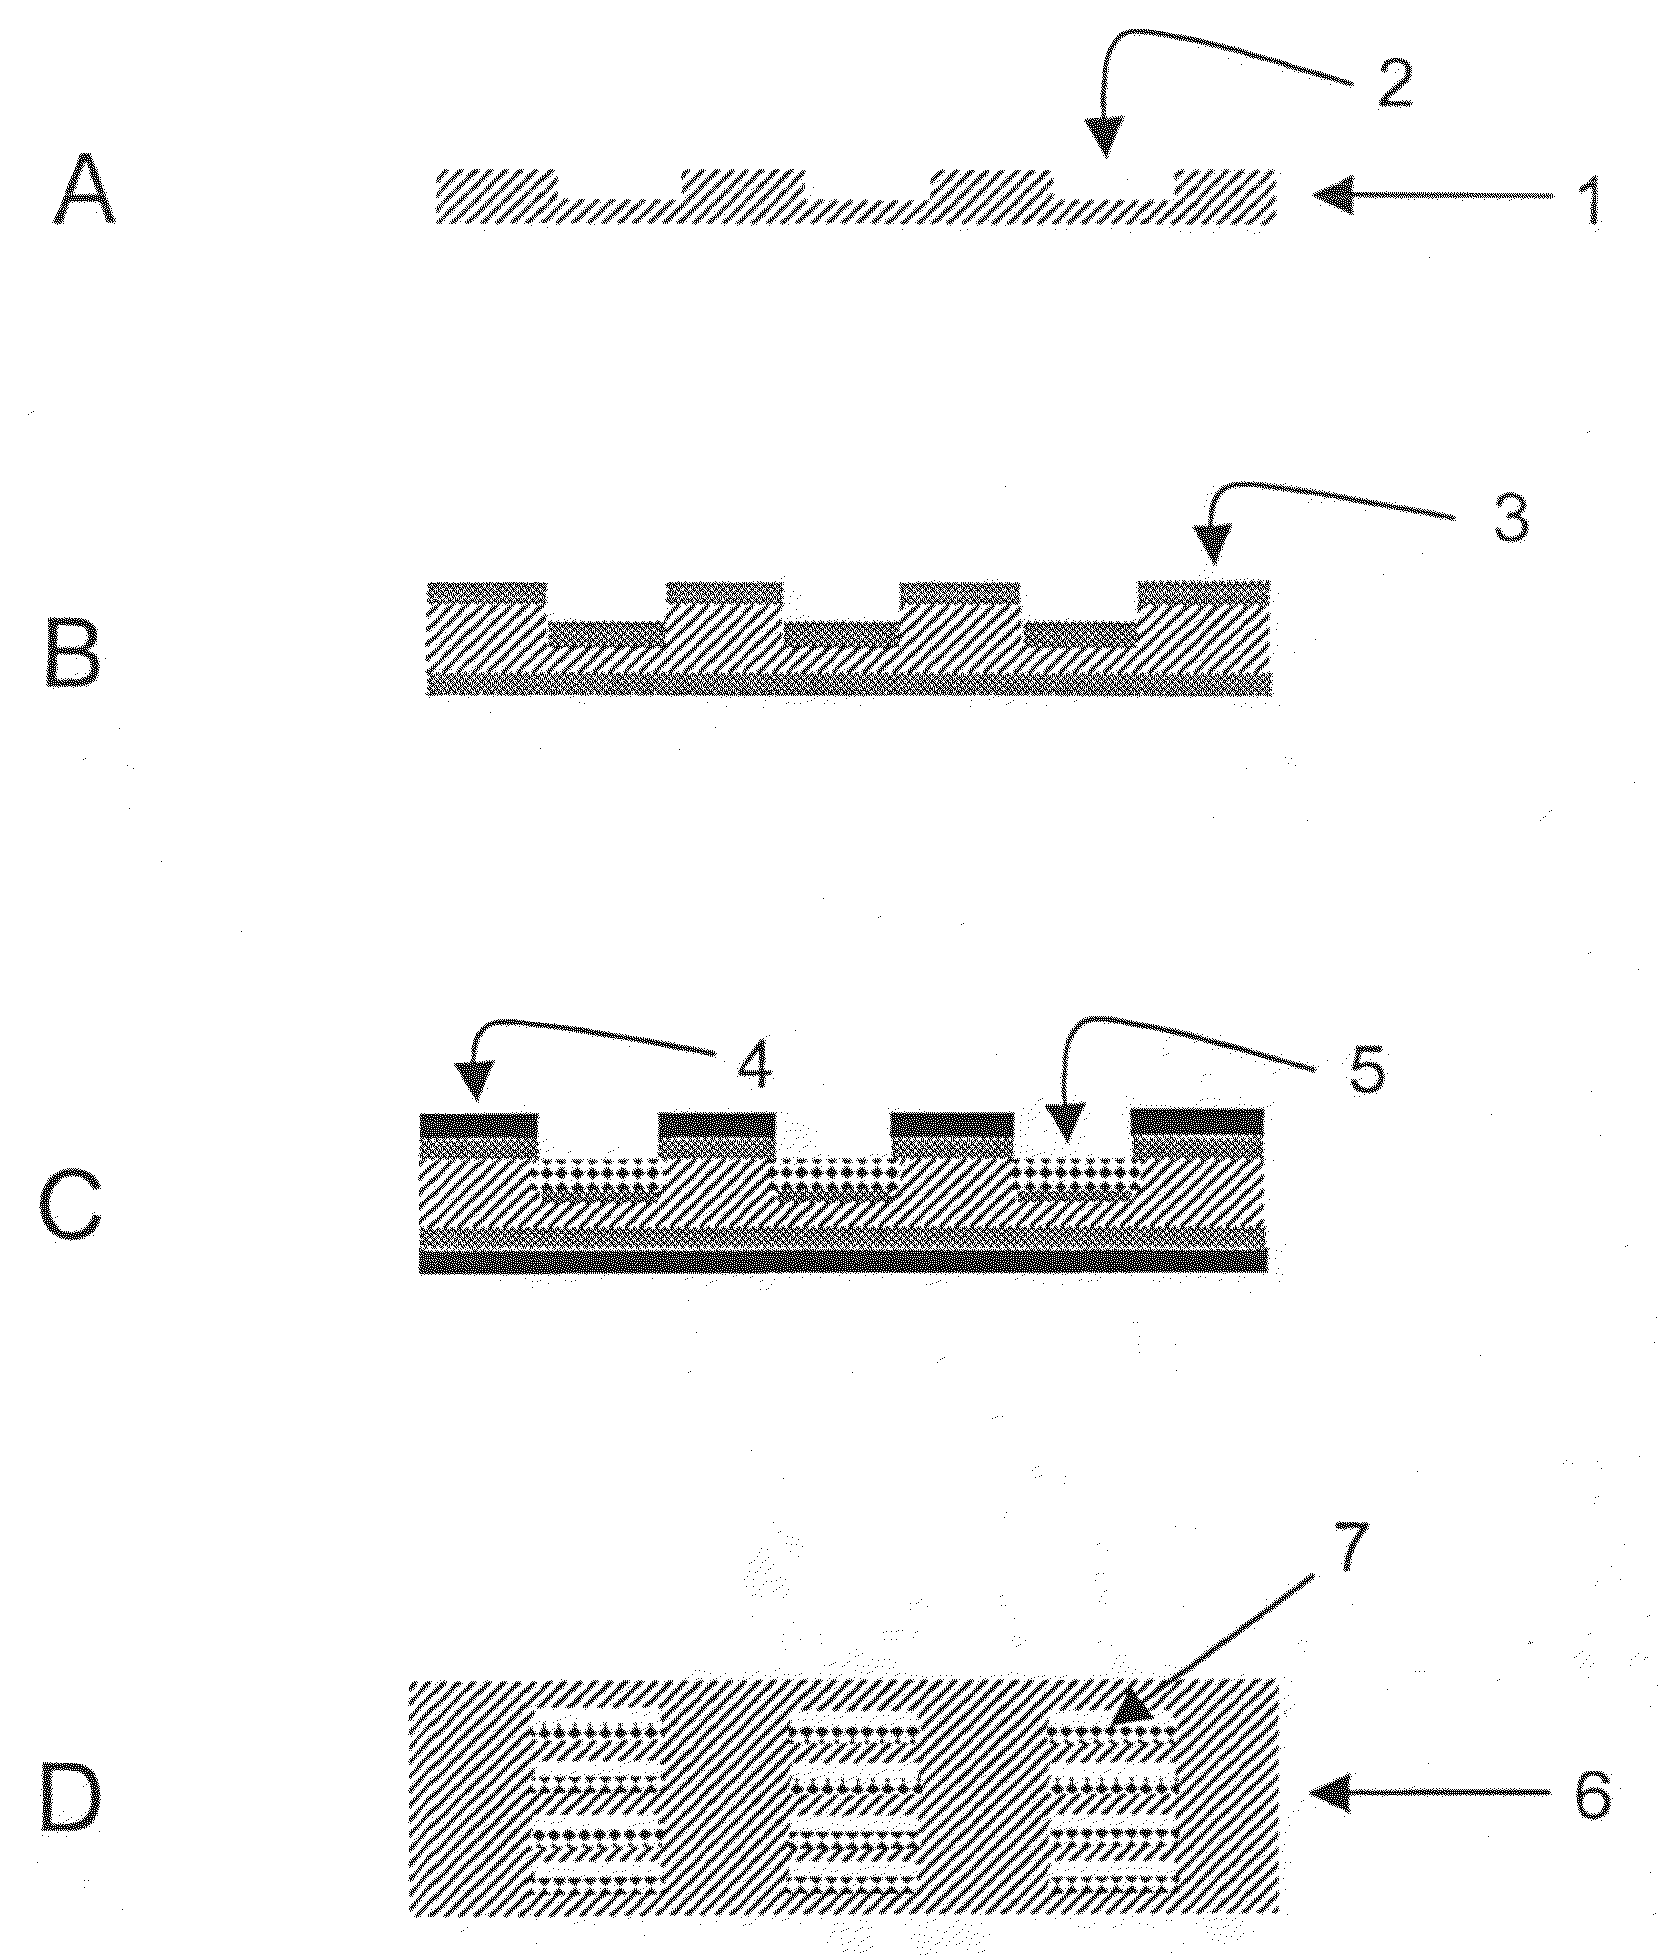 Process for manufacturing a microreactor and its use as a reformer